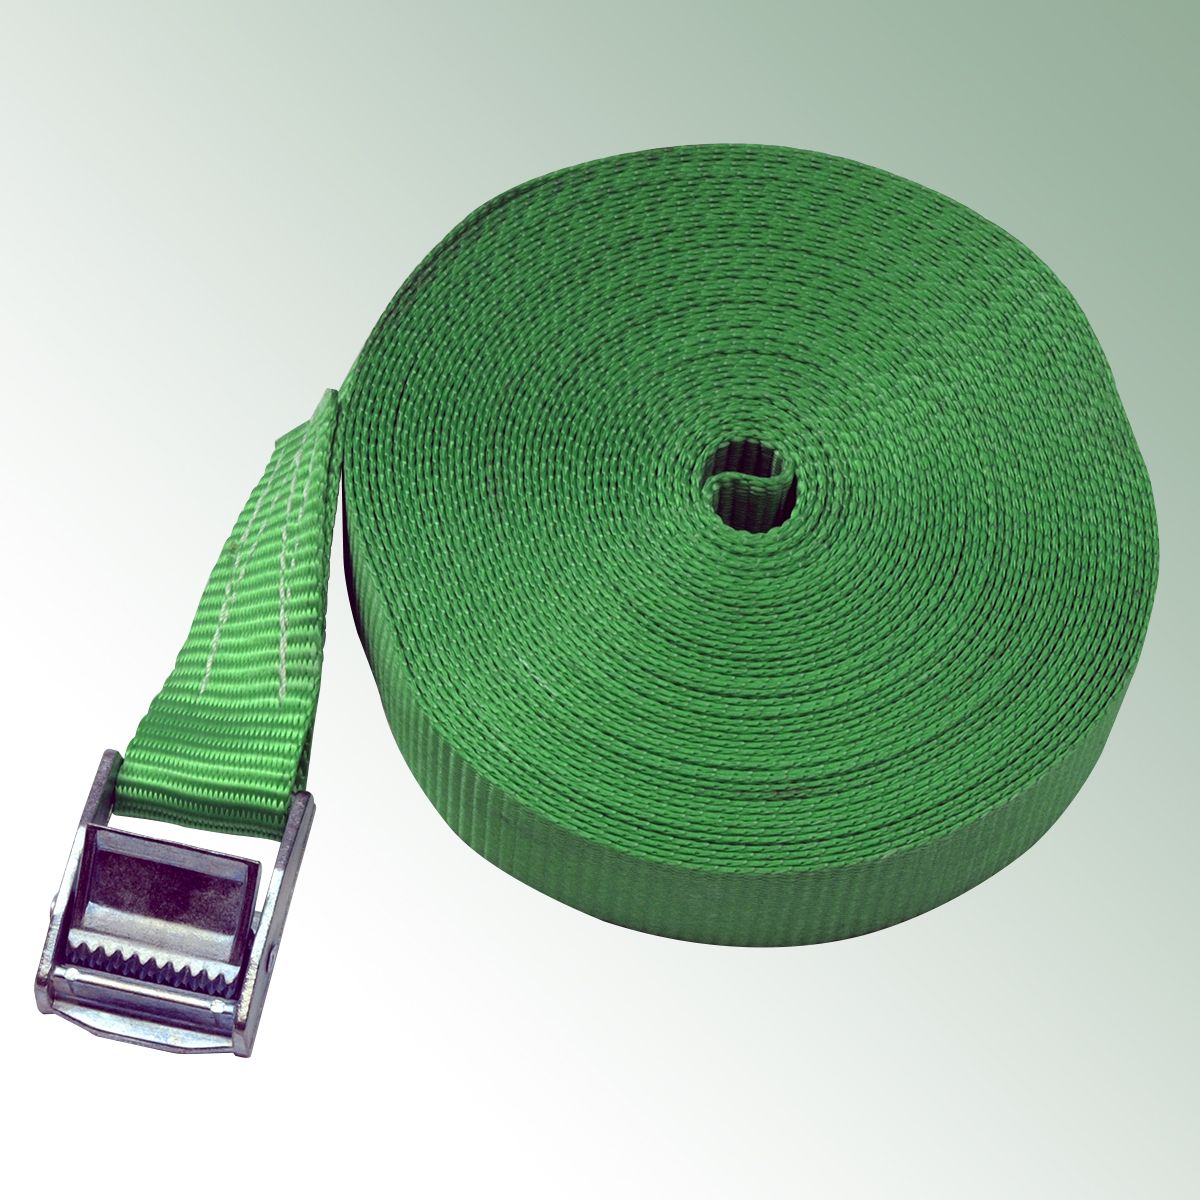 Lashing Strap 25 mm thick 10 m long single with turnbuckle